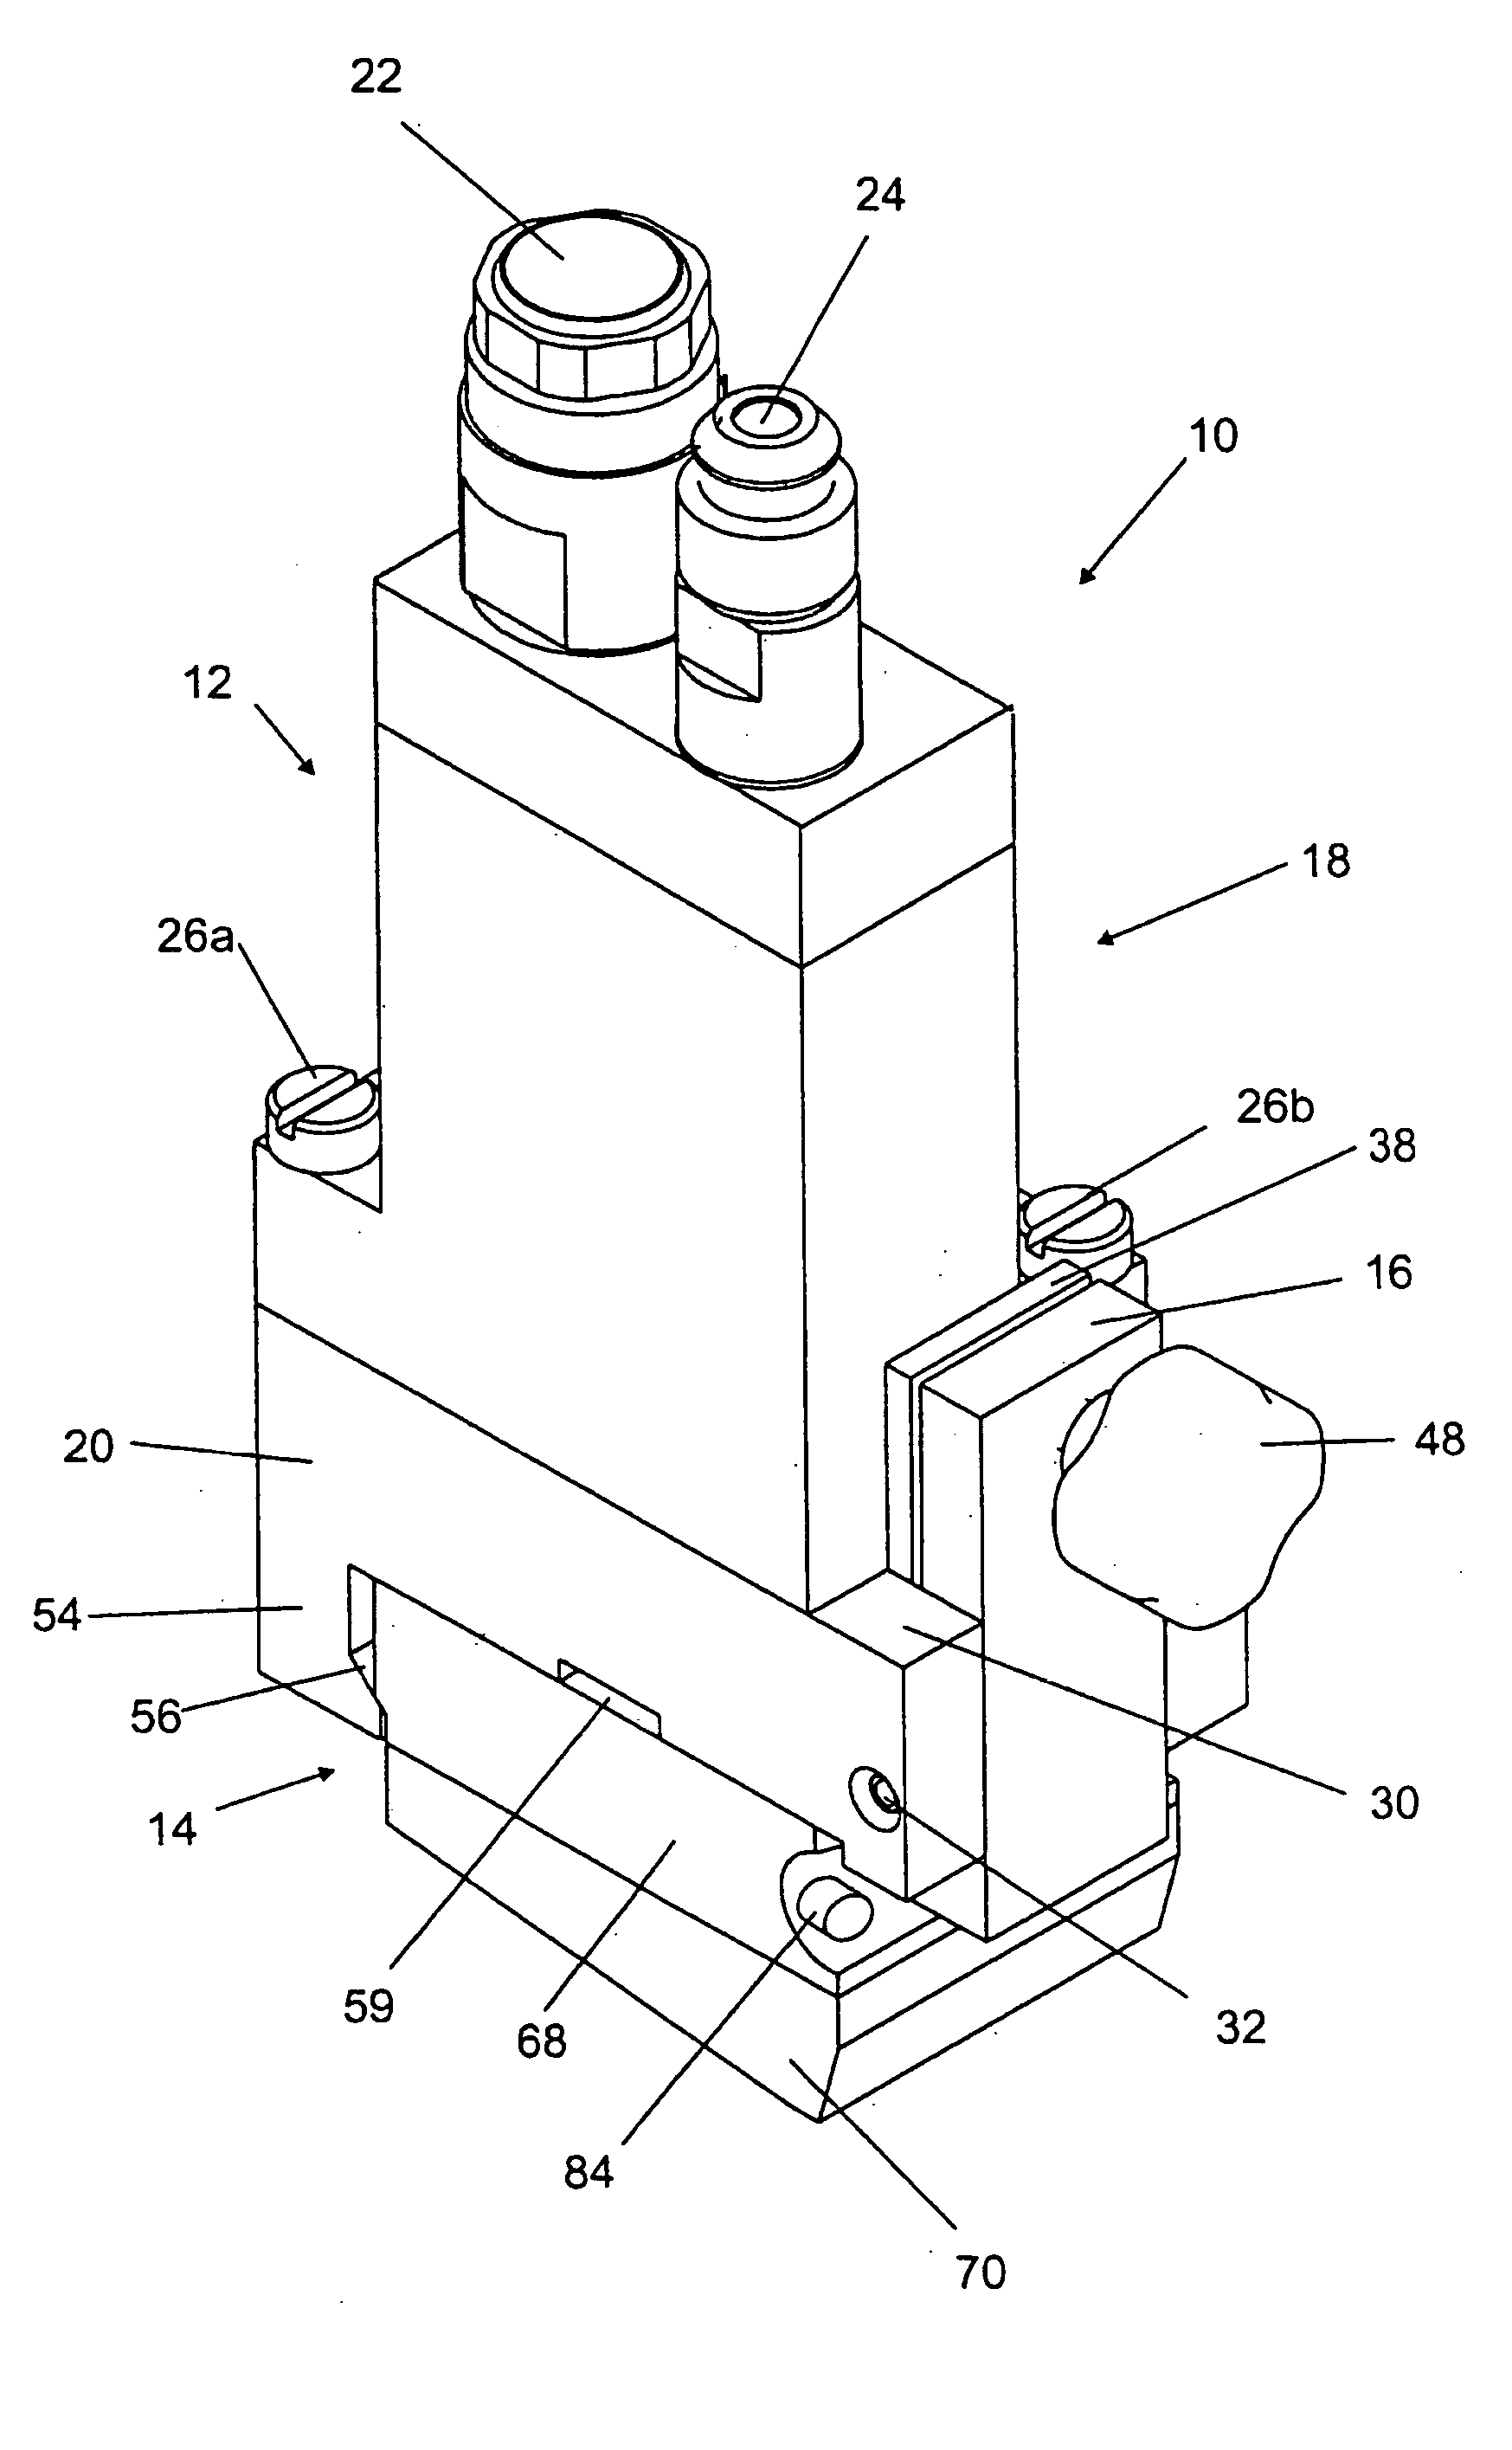 Applicator head, applicator nozzle arrangement, adaptor plate and mounting plate